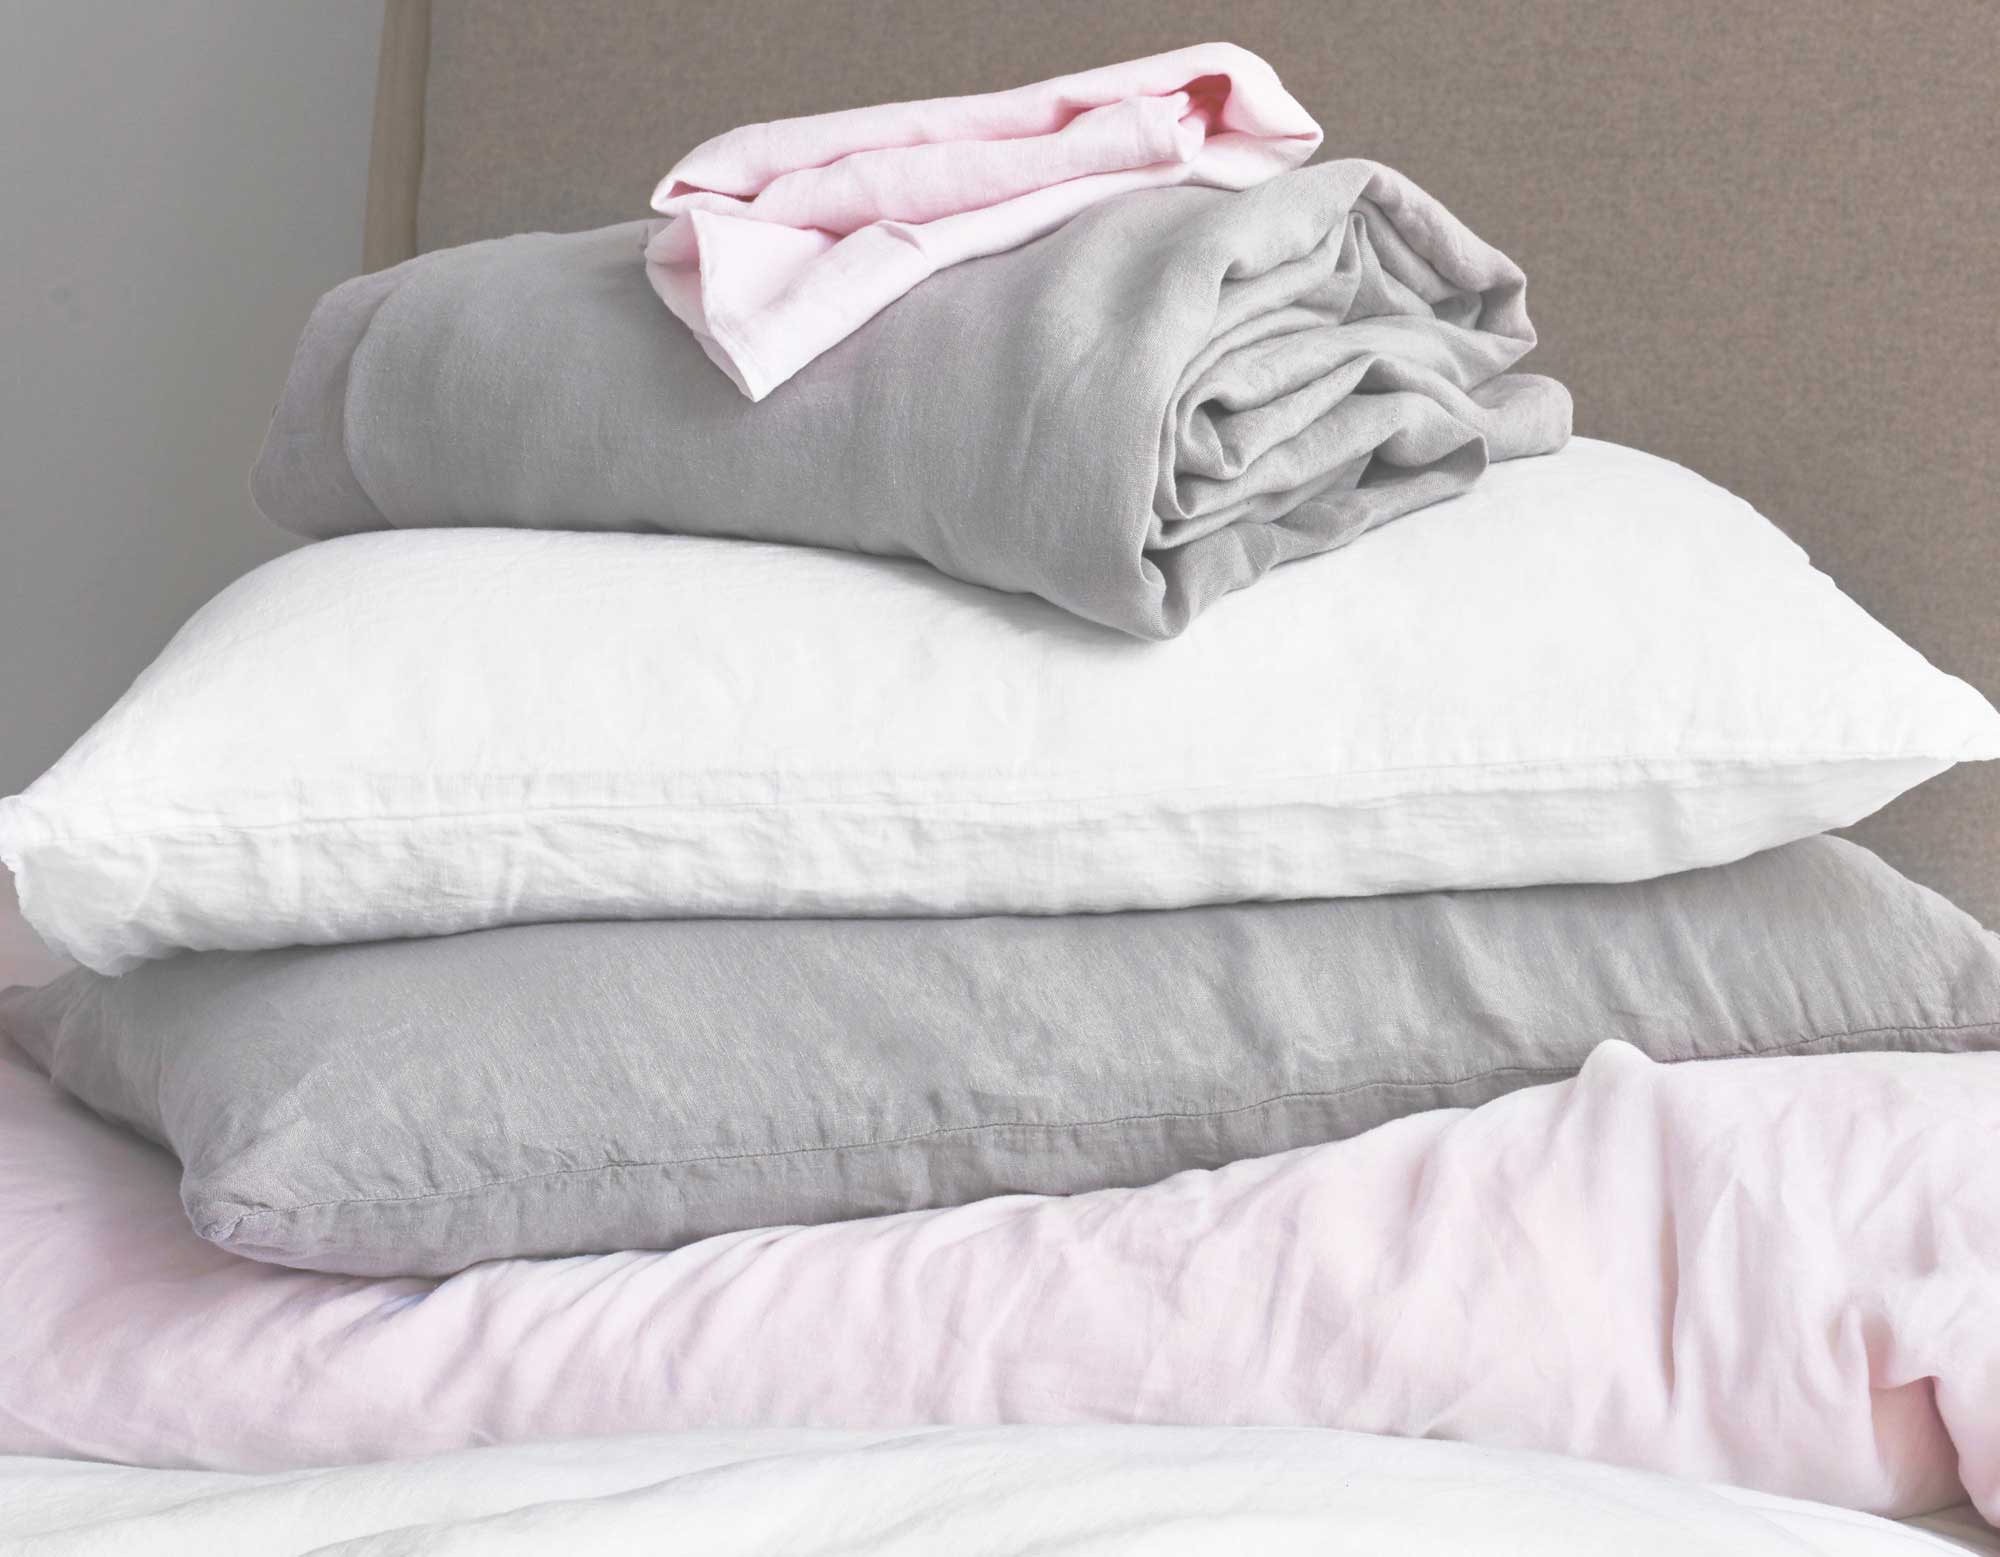 Pink, grey and white linen pillowcases in a pile